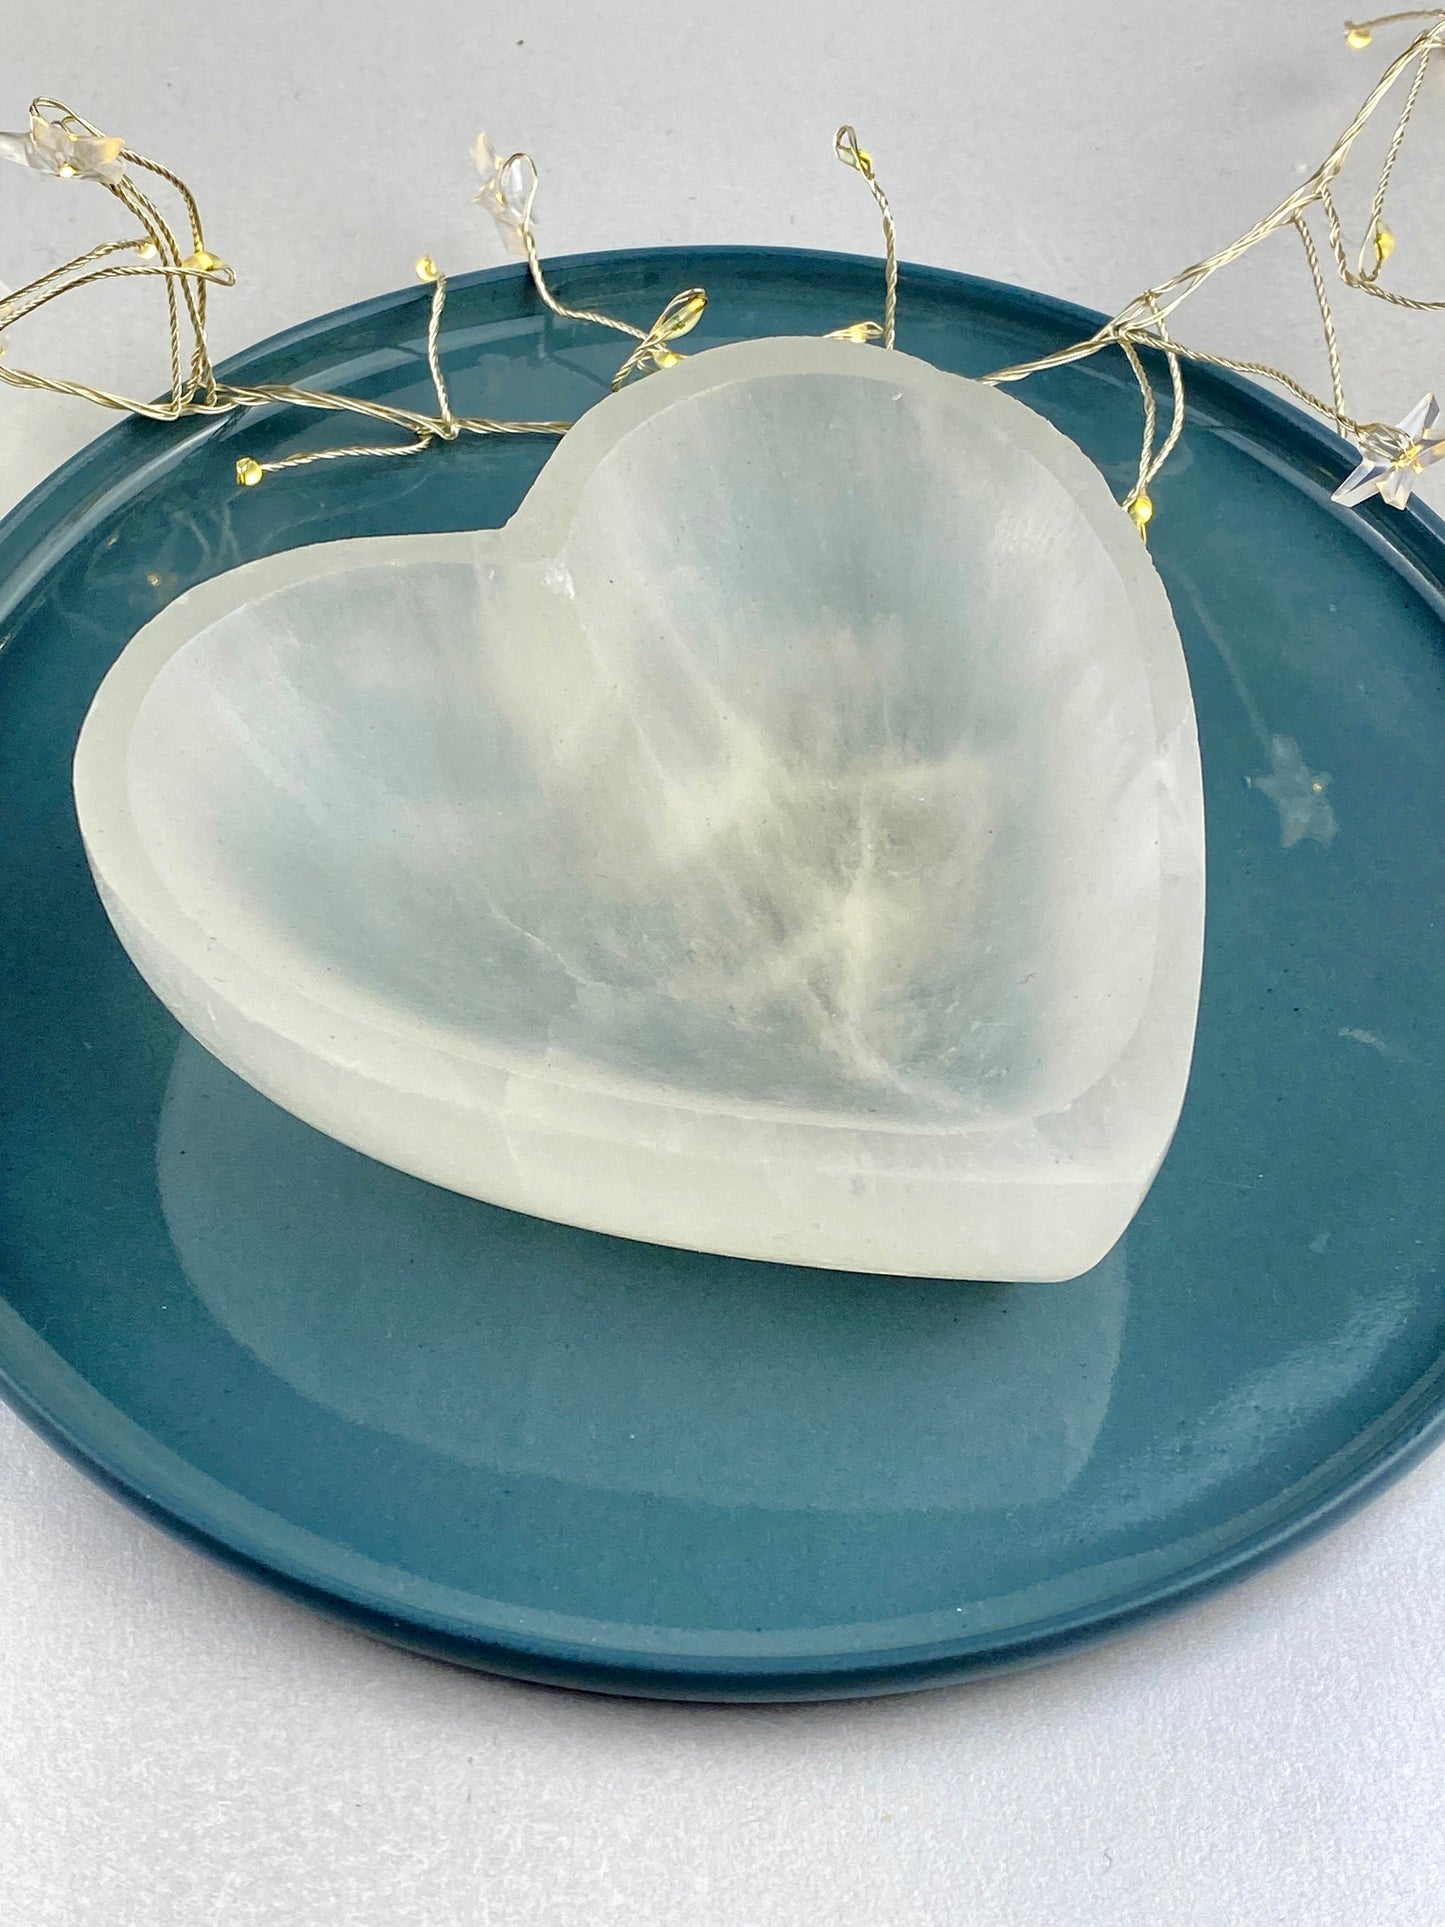 Selenite heart crystal bowl, Crystal charging, Cleanse crystals, Gift for a loved one, House warming gift